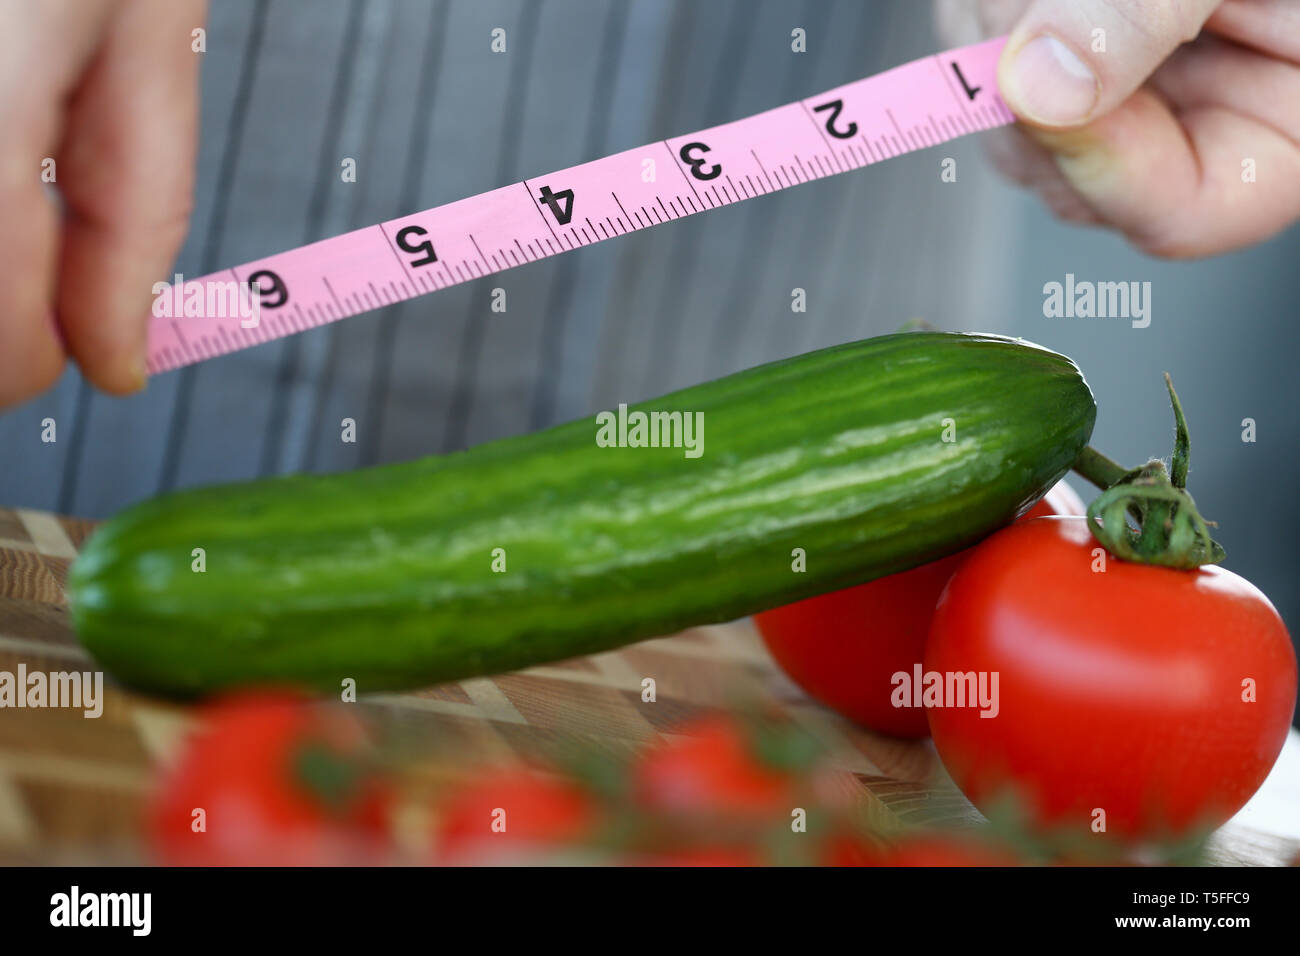 Male Hands Measure Green Ripe Cucumber Length Stock Photo